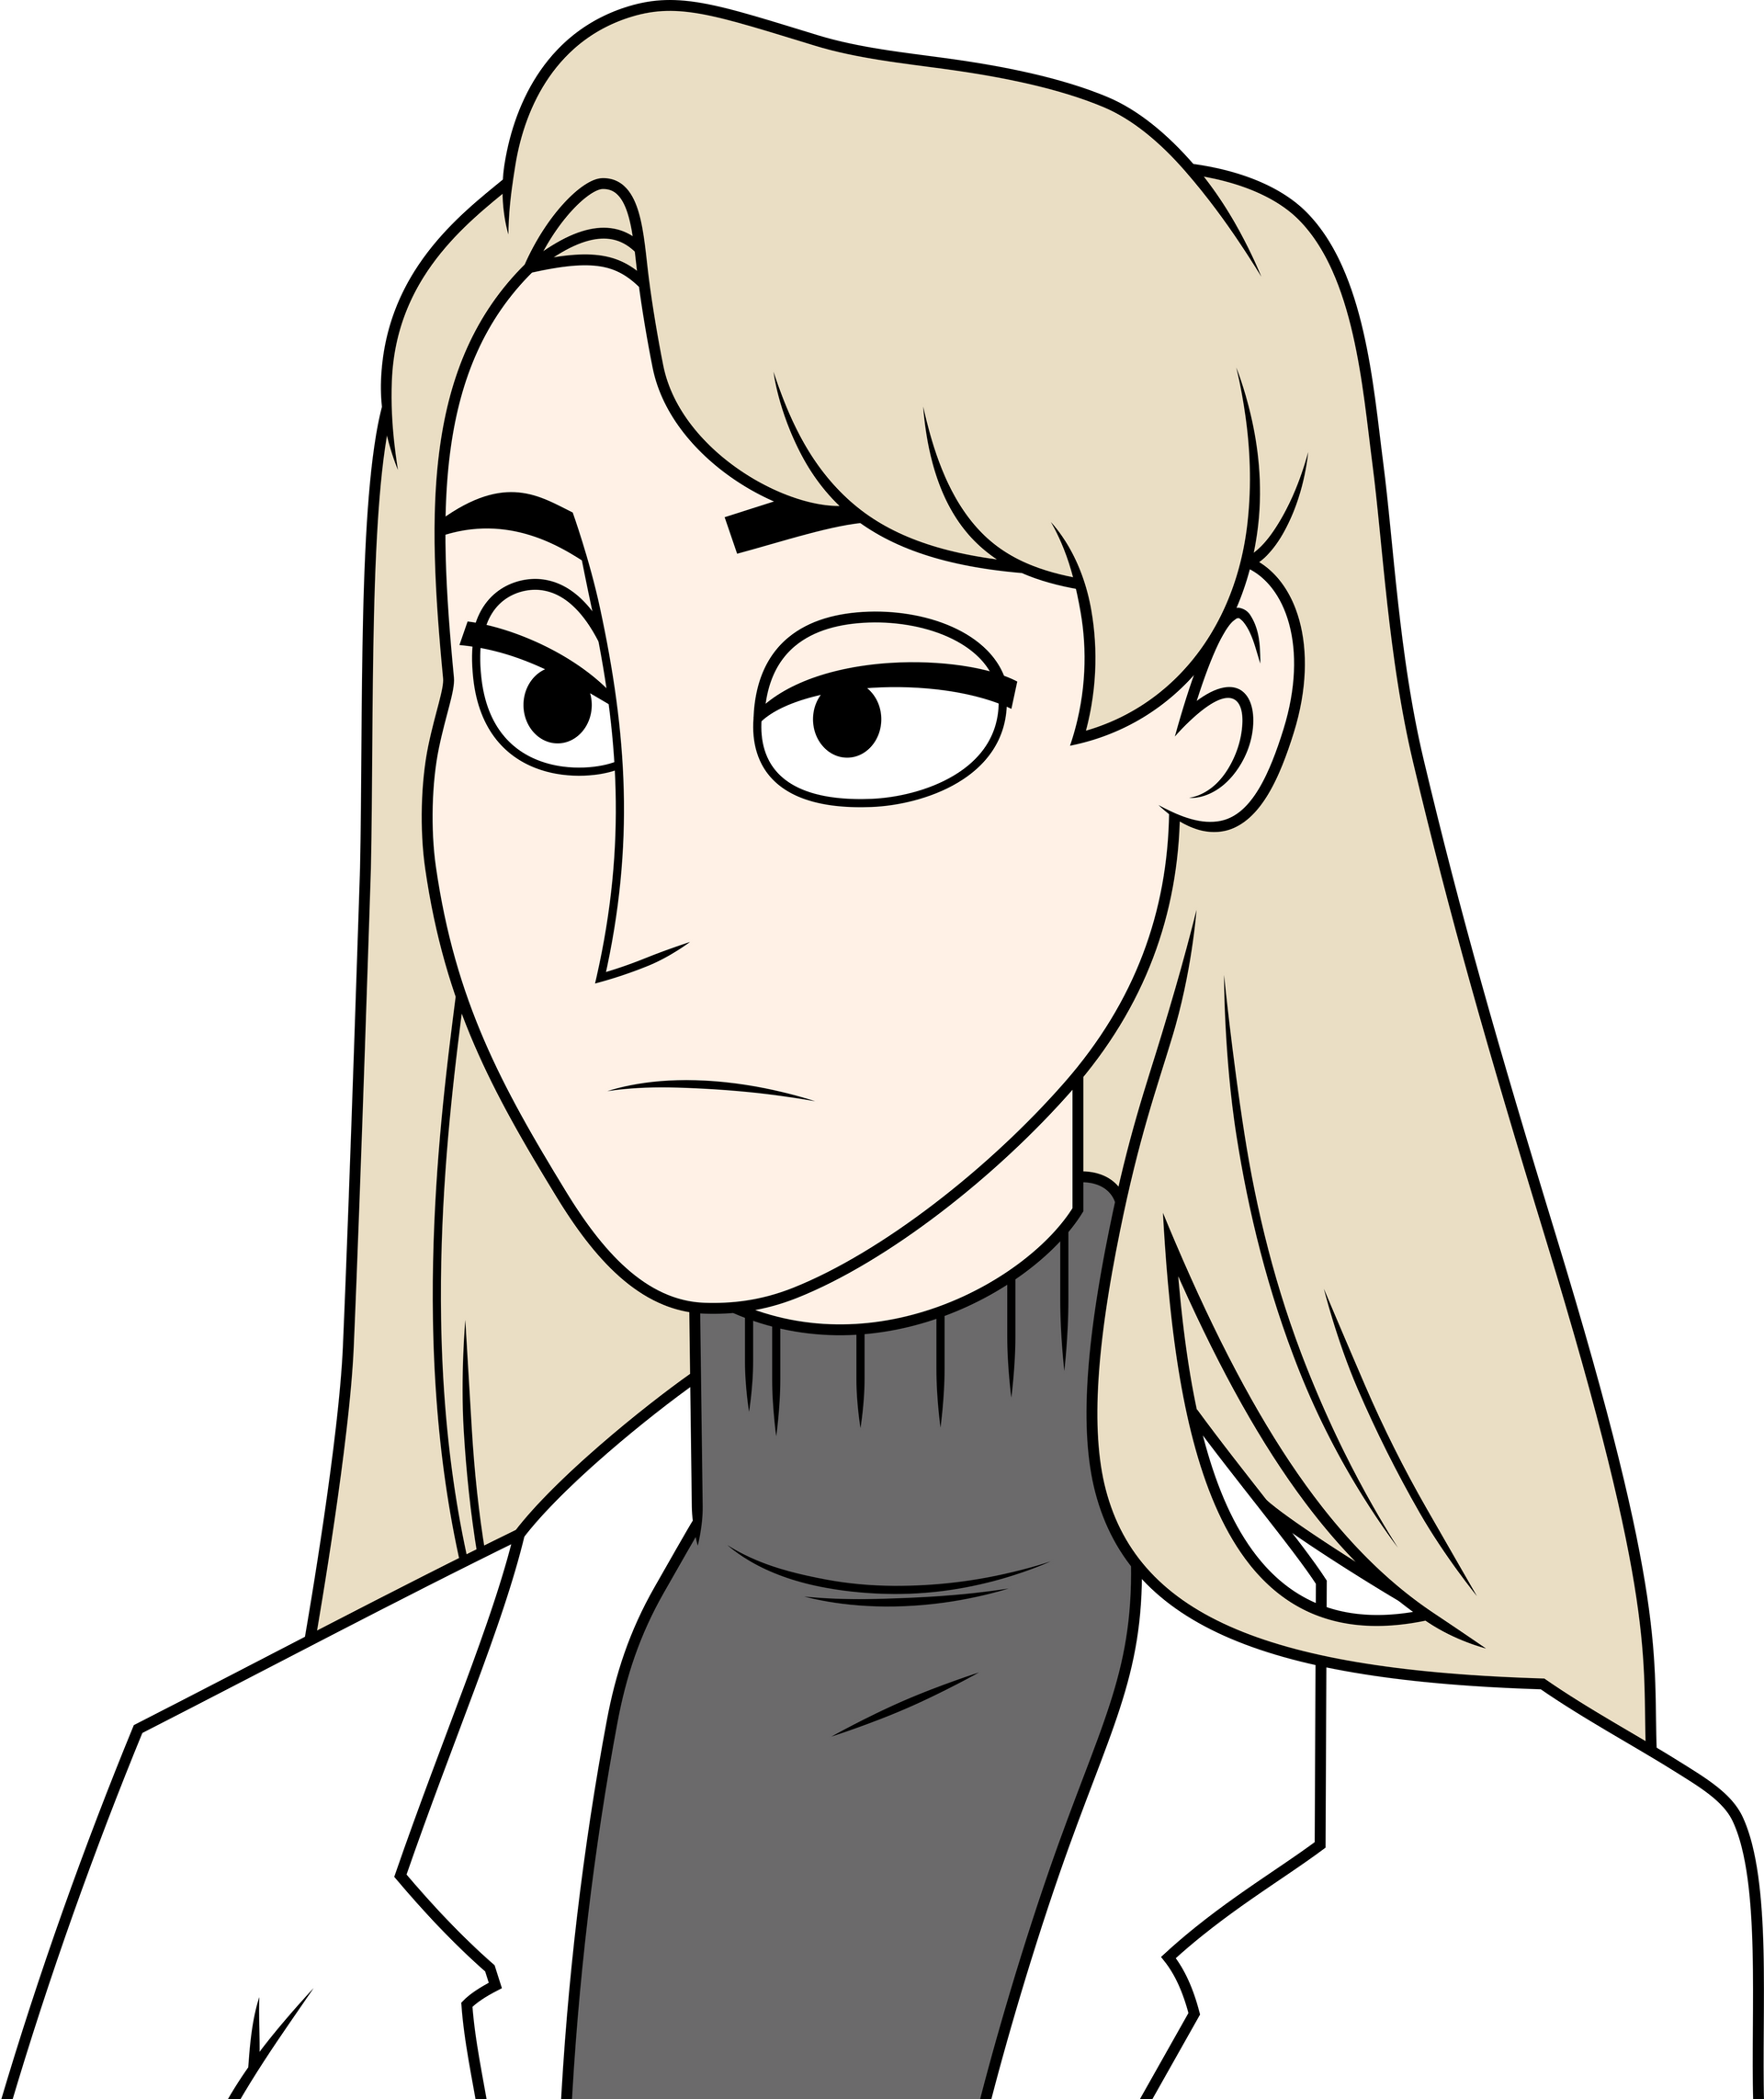 Dr.Buck SCP Animated- Tales From The Foundation Messy redraw (i don't know  if am allowed to post it here but really enjoy the character!) : r/SCP